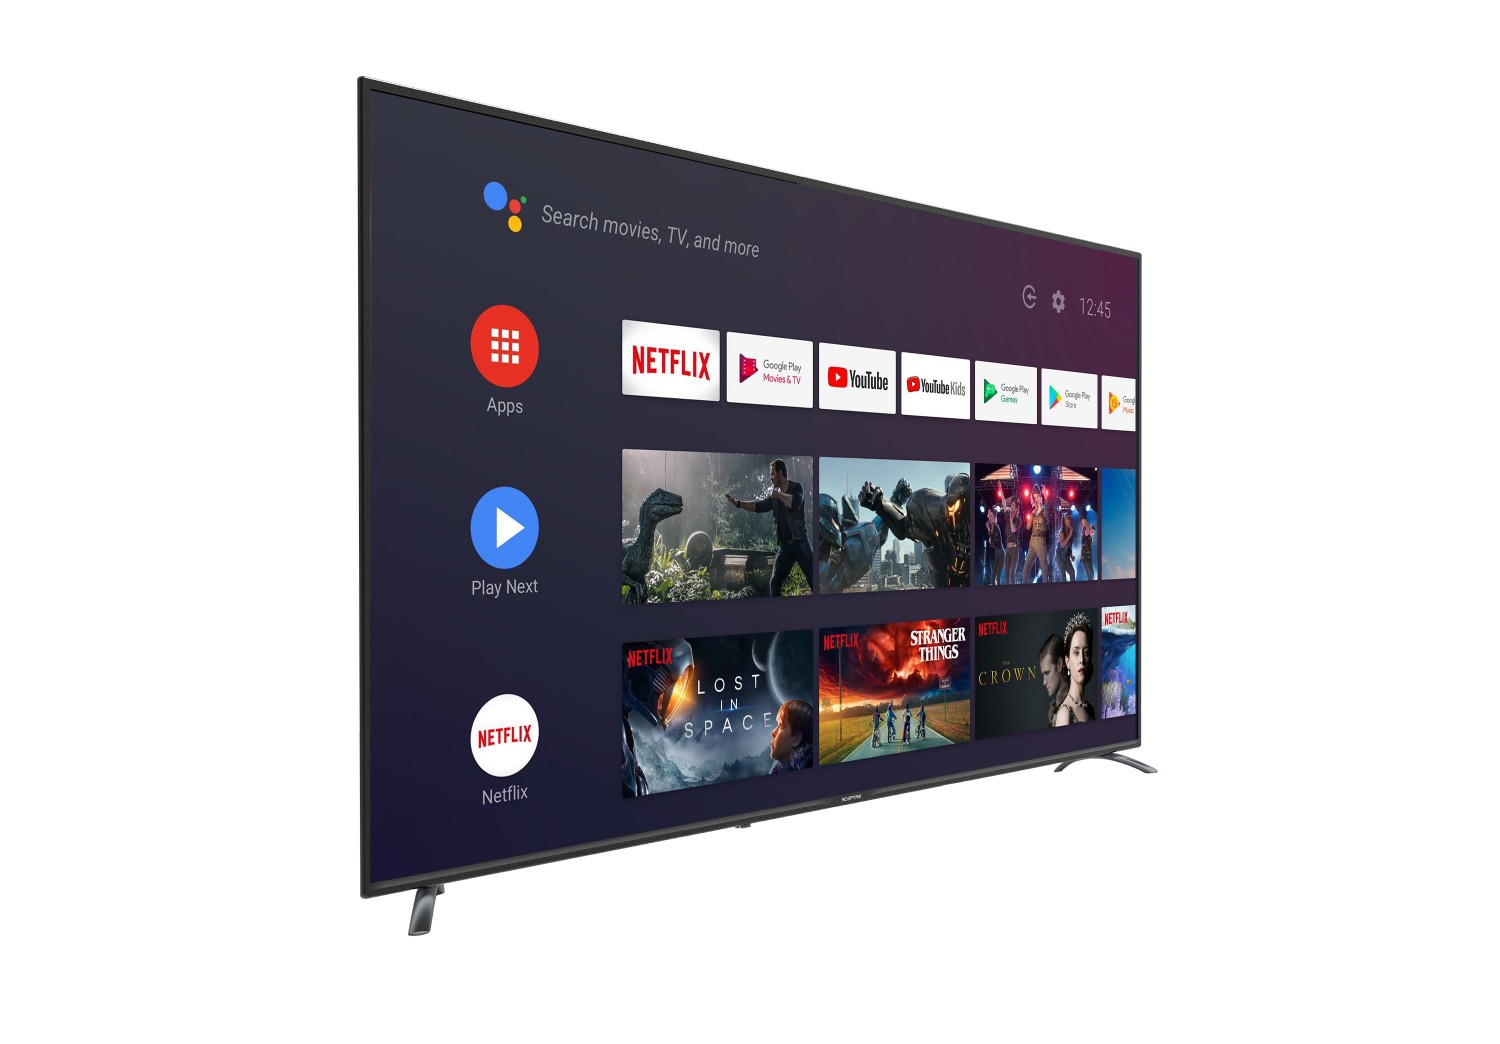 Sceptre 65" Class TV (2160p) Android Smart 4K LED TV with Google Assistant (A658CV-U) - image 2 of 5